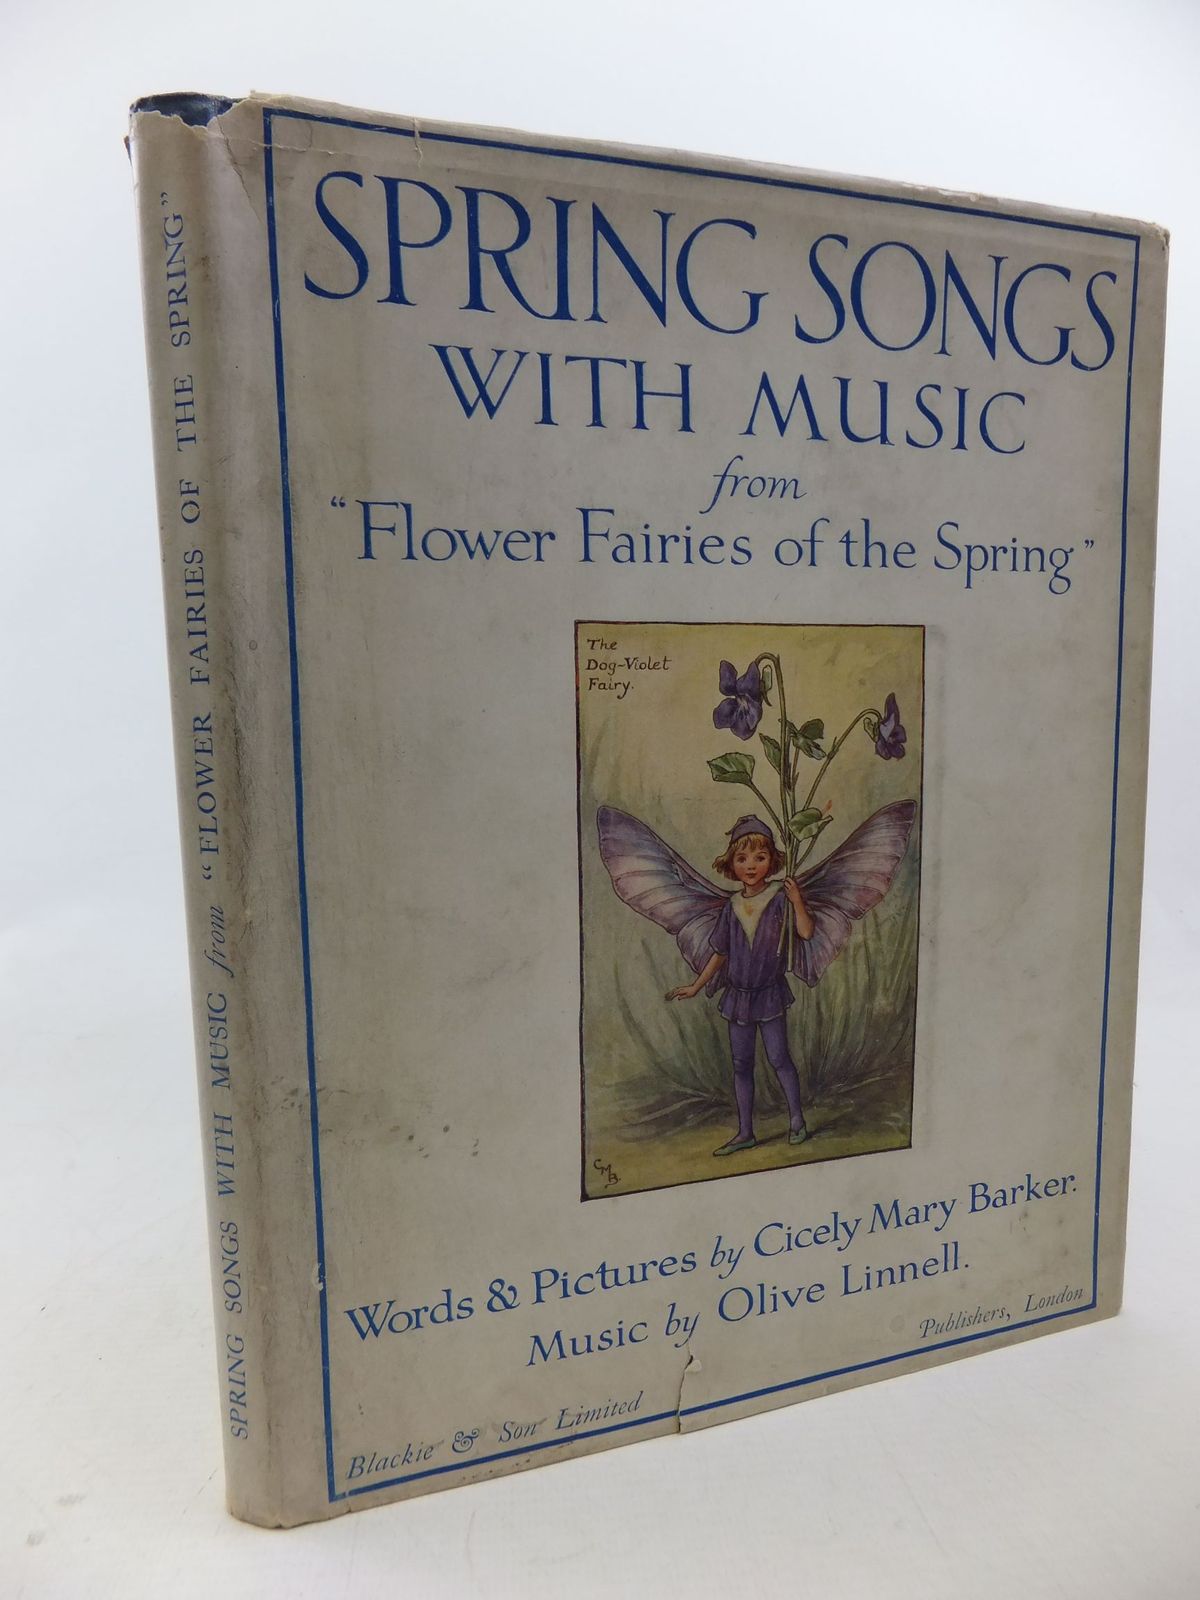 Photo of SPRING SONGS WITH MUSIC written by Barker, Cicely Mary
Linnell, Olive illustrated by Barker, Cicely Mary published by Blackie & Son Ltd. (STOCK CODE: 2114228)  for sale by Stella & Rose's Books